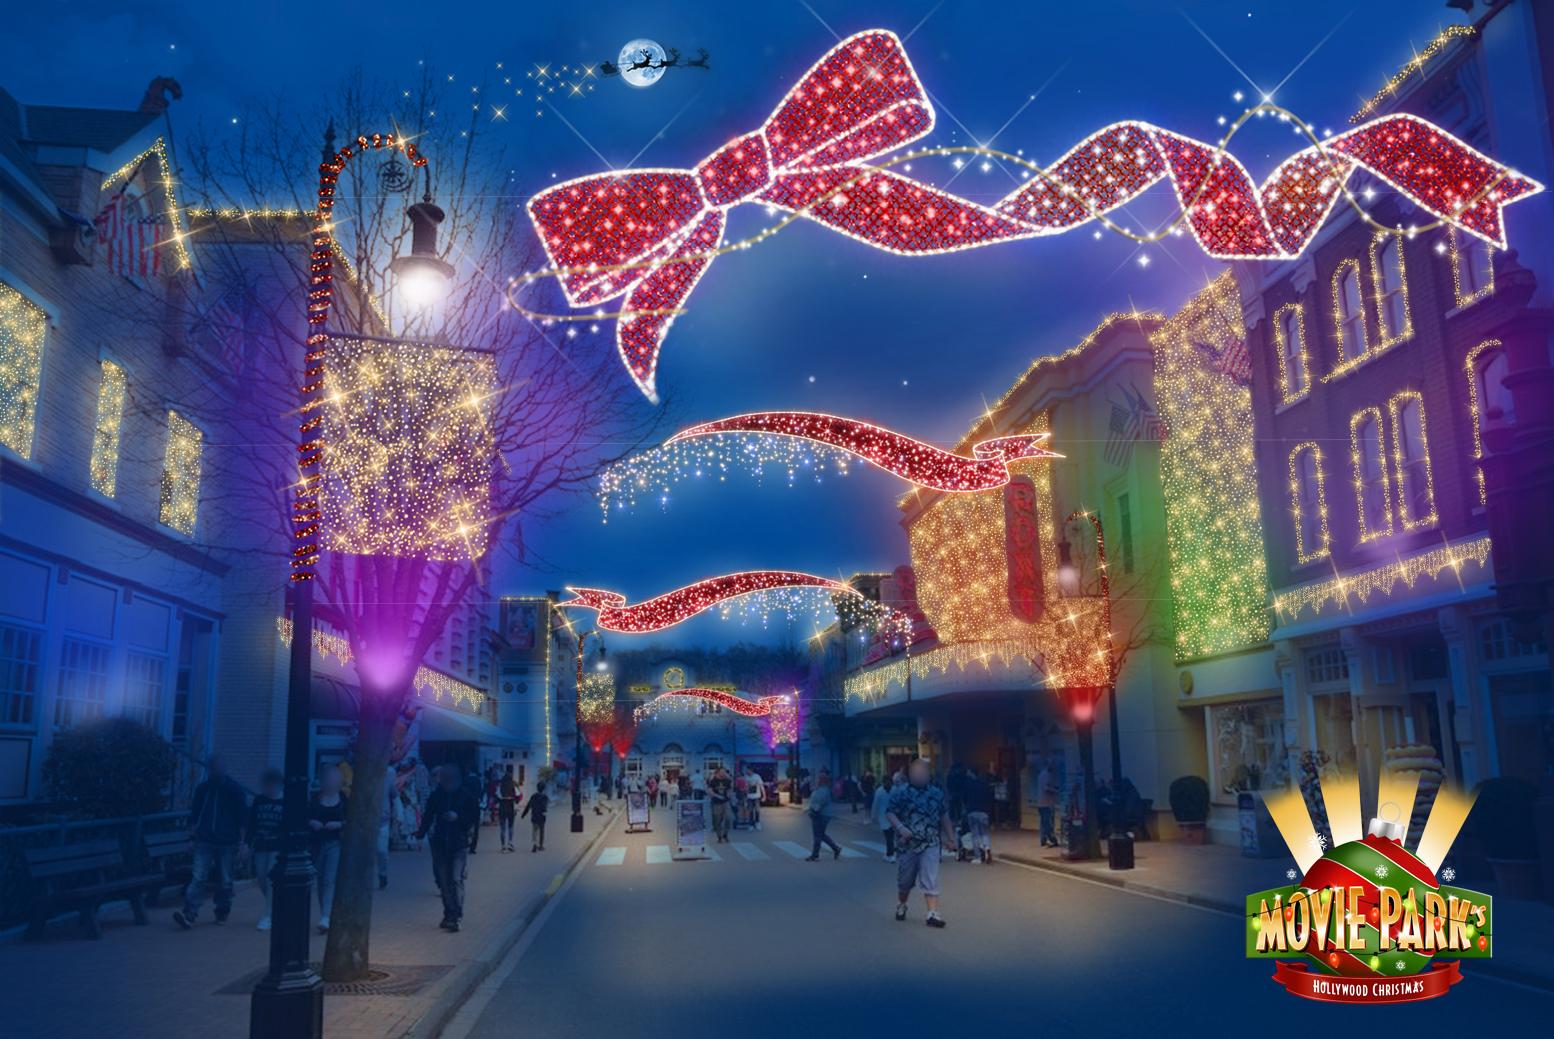 Movie Park's Hollywood Christmas in Duitsland